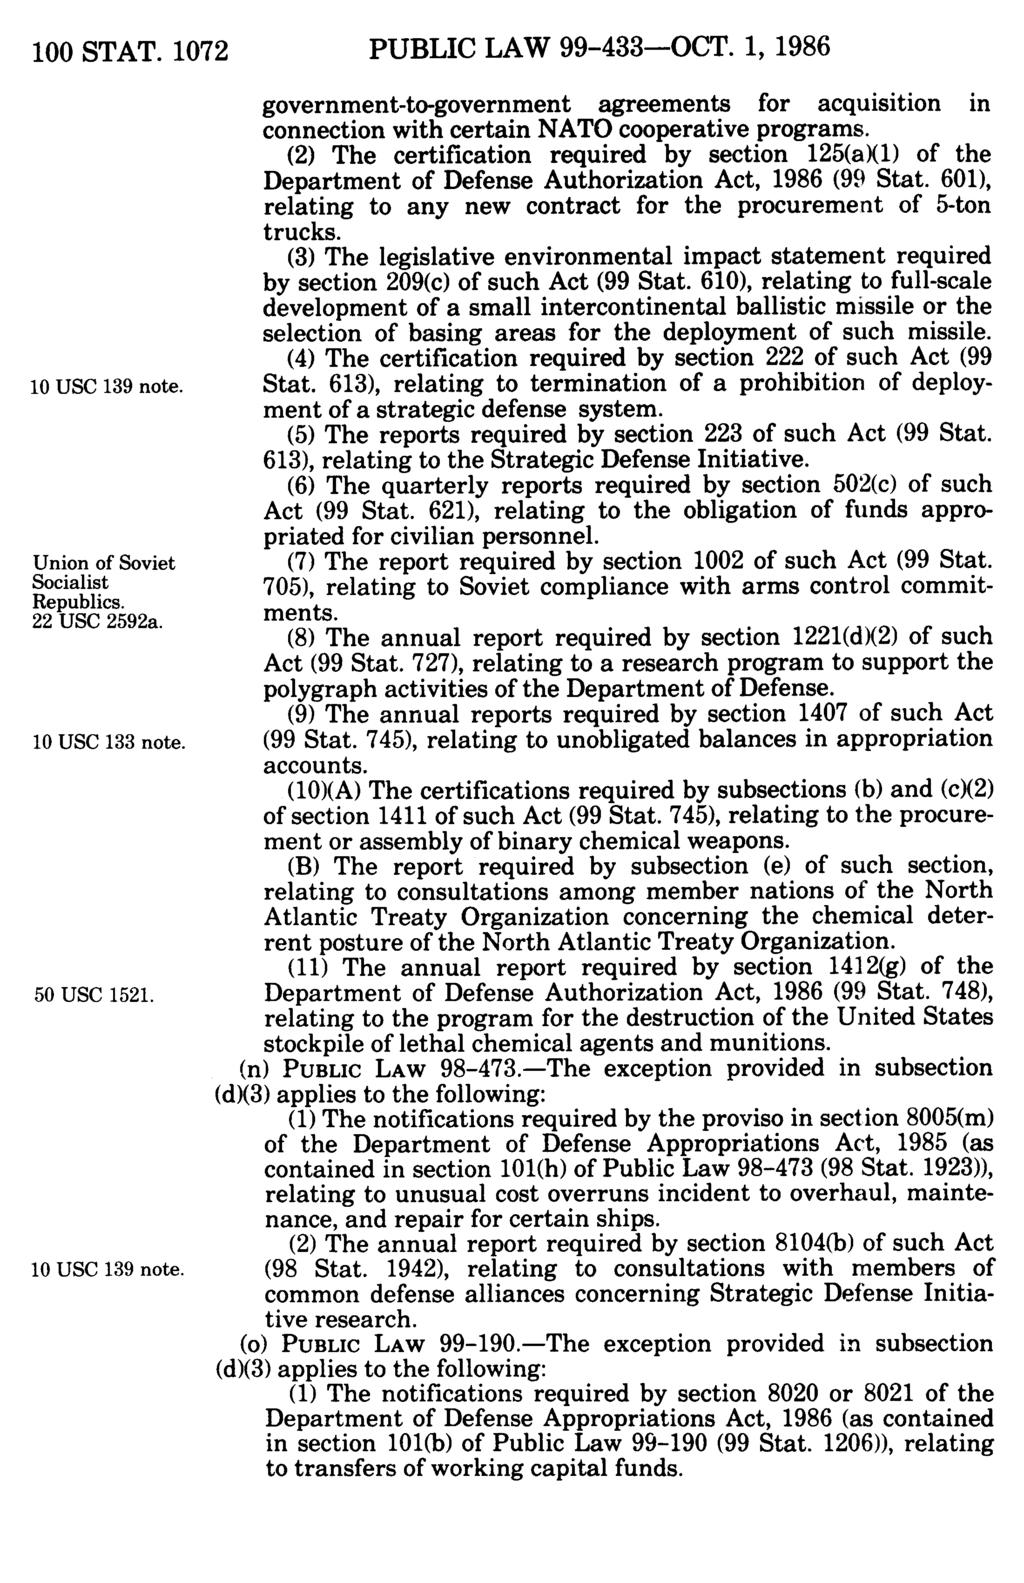 100 STAT. 1072 PUBLIC LAW 99-433-OCT. 1, 1986 government-to-government agreements for acquisition in connection with certain NATO cooperative programs.